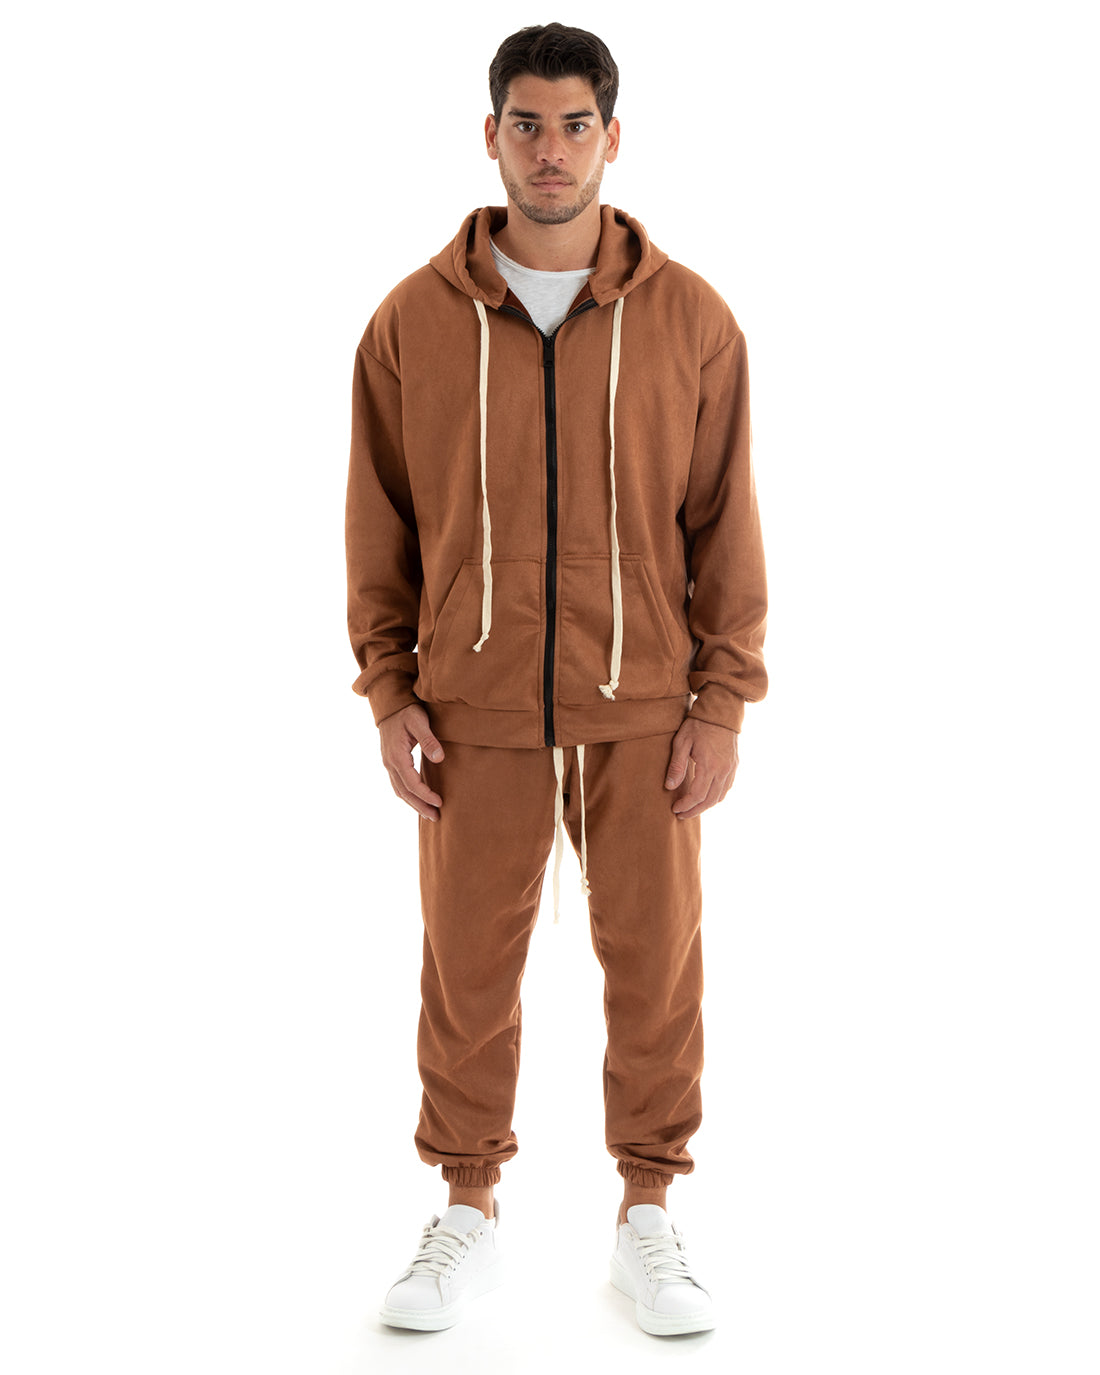 Men's Tracksuit Set with Hood and Zip Trousers with Drawstring Waist in Tobacco Eco Suede GIOSAL-OU2398A